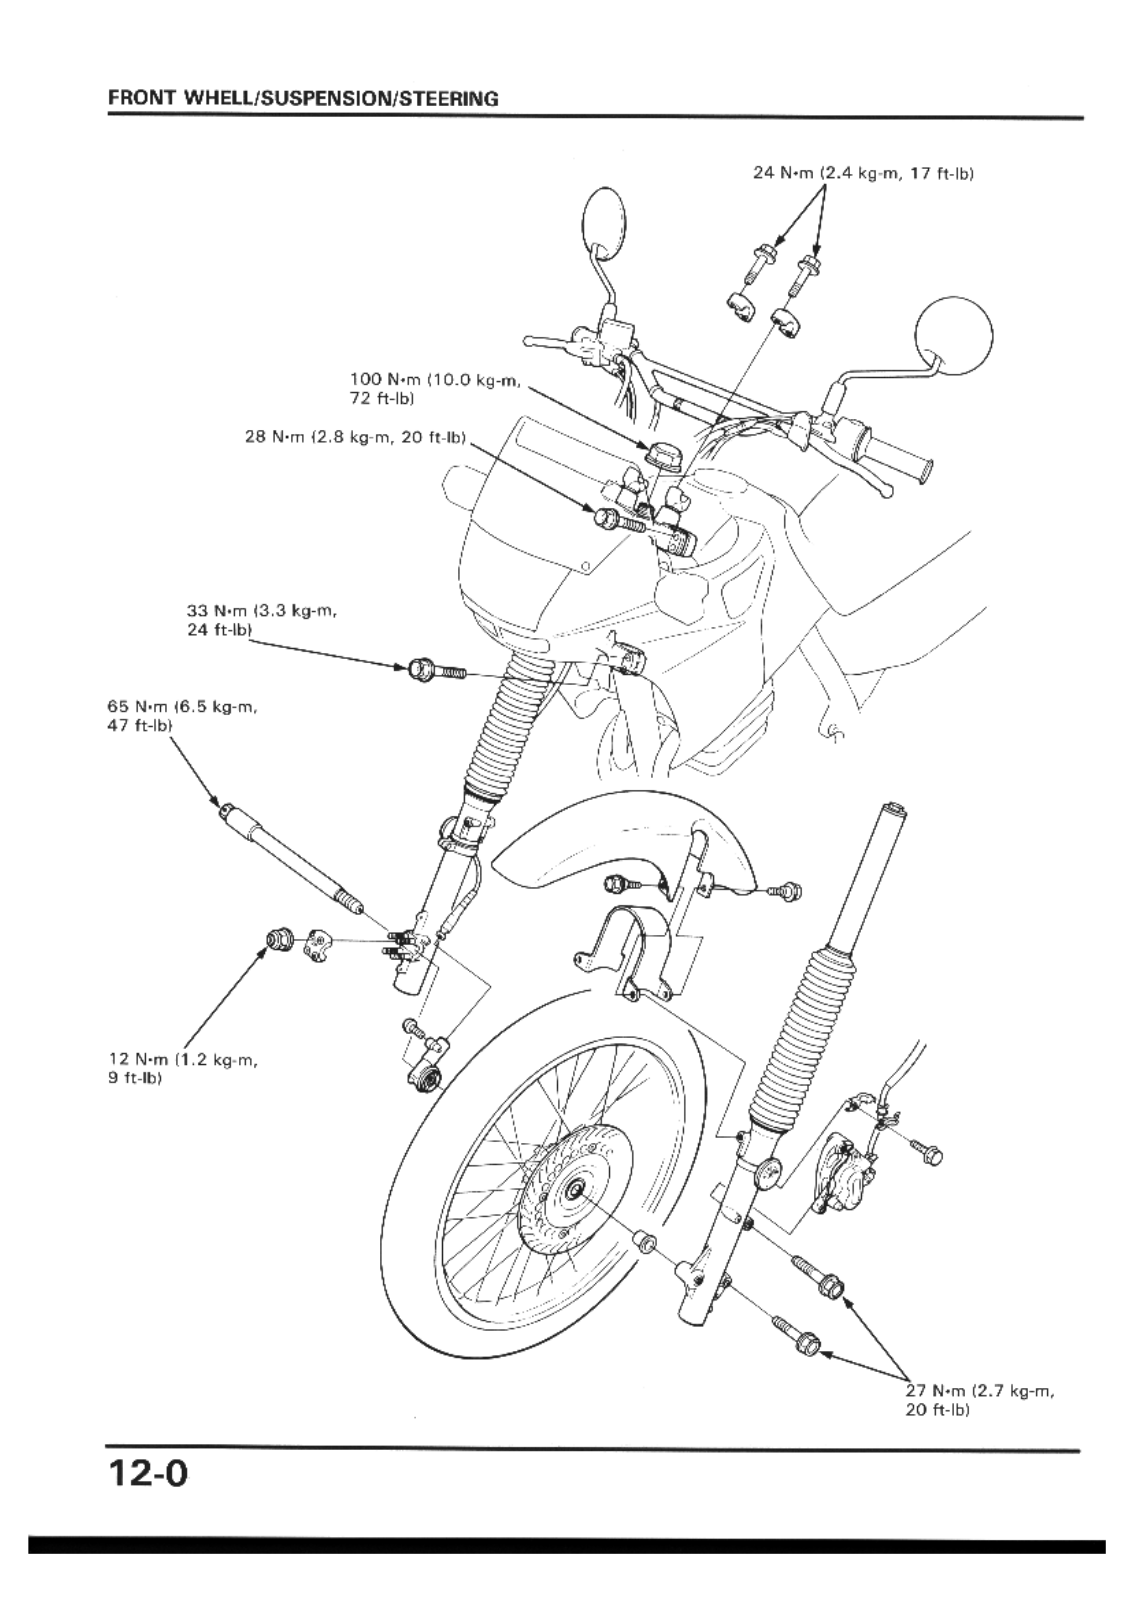 Honda 650 88-89, NX 650 88-89 Service Manual L Section 12 Front wheel suspension steering